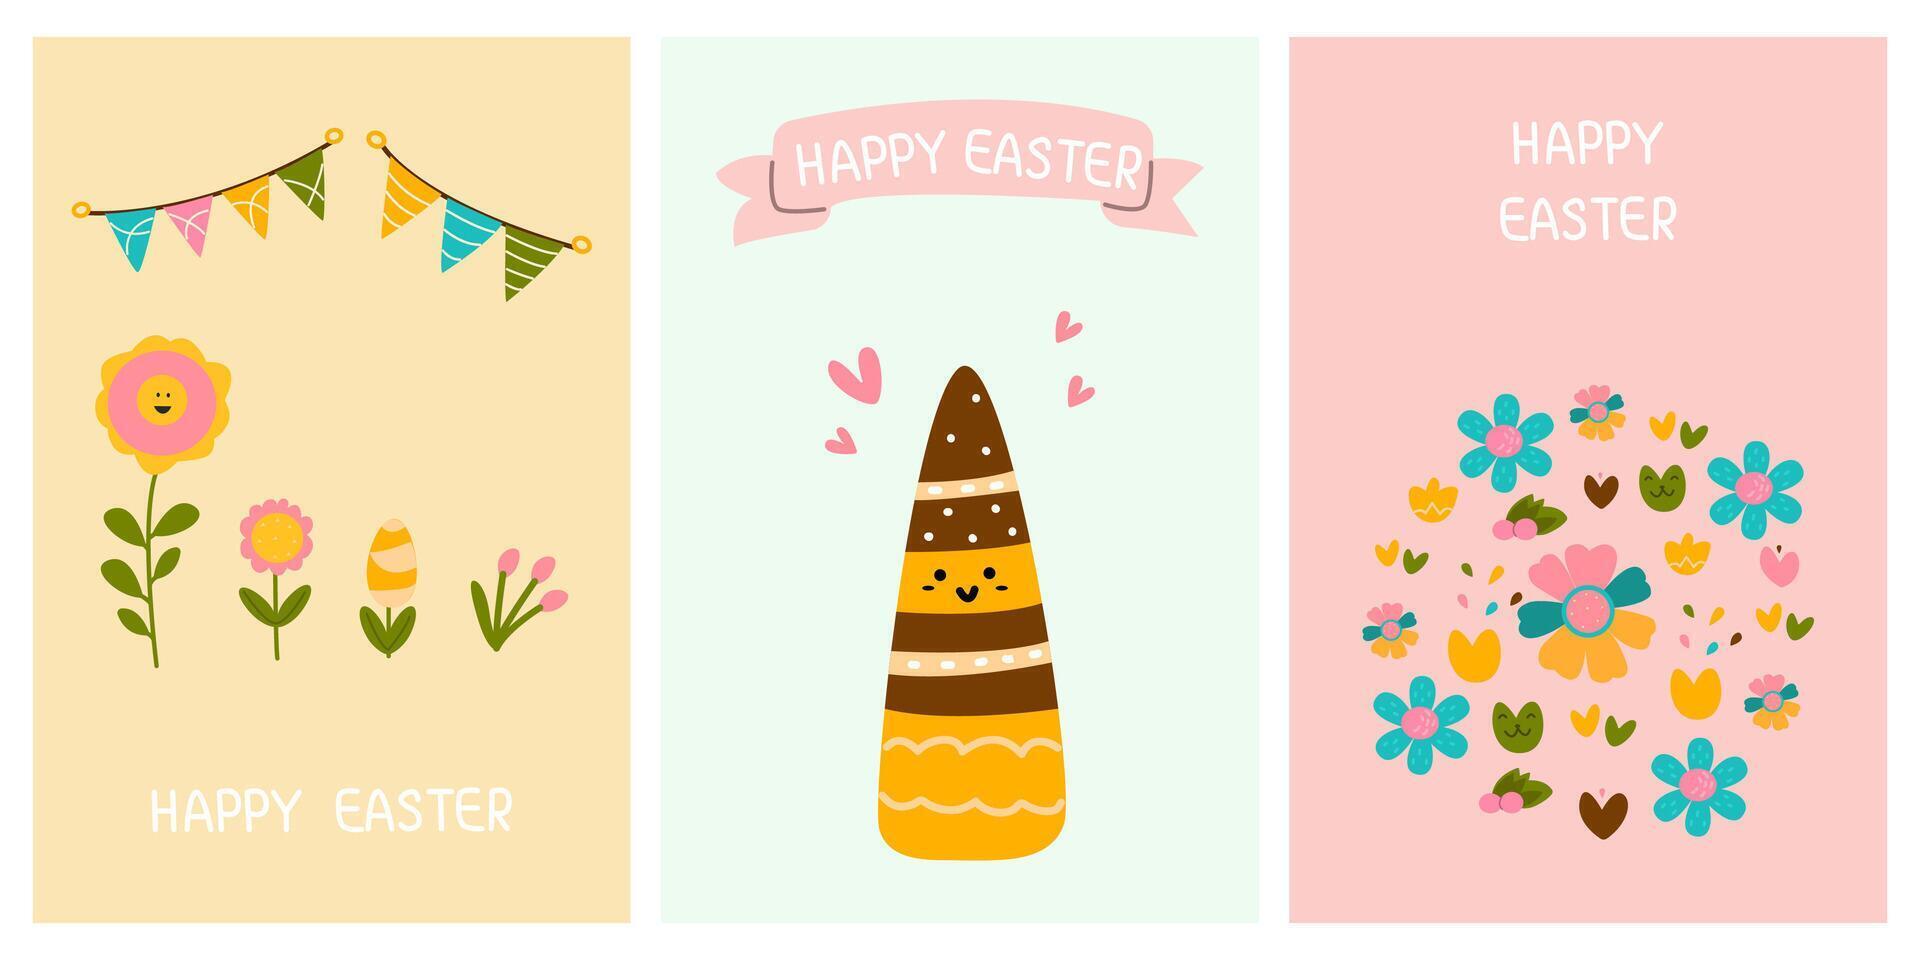 Greeting cute cards for the Easter holiday. Cute carrots, spring cartoon flowers. For posters, postcards, scrapbooking, stickers vector